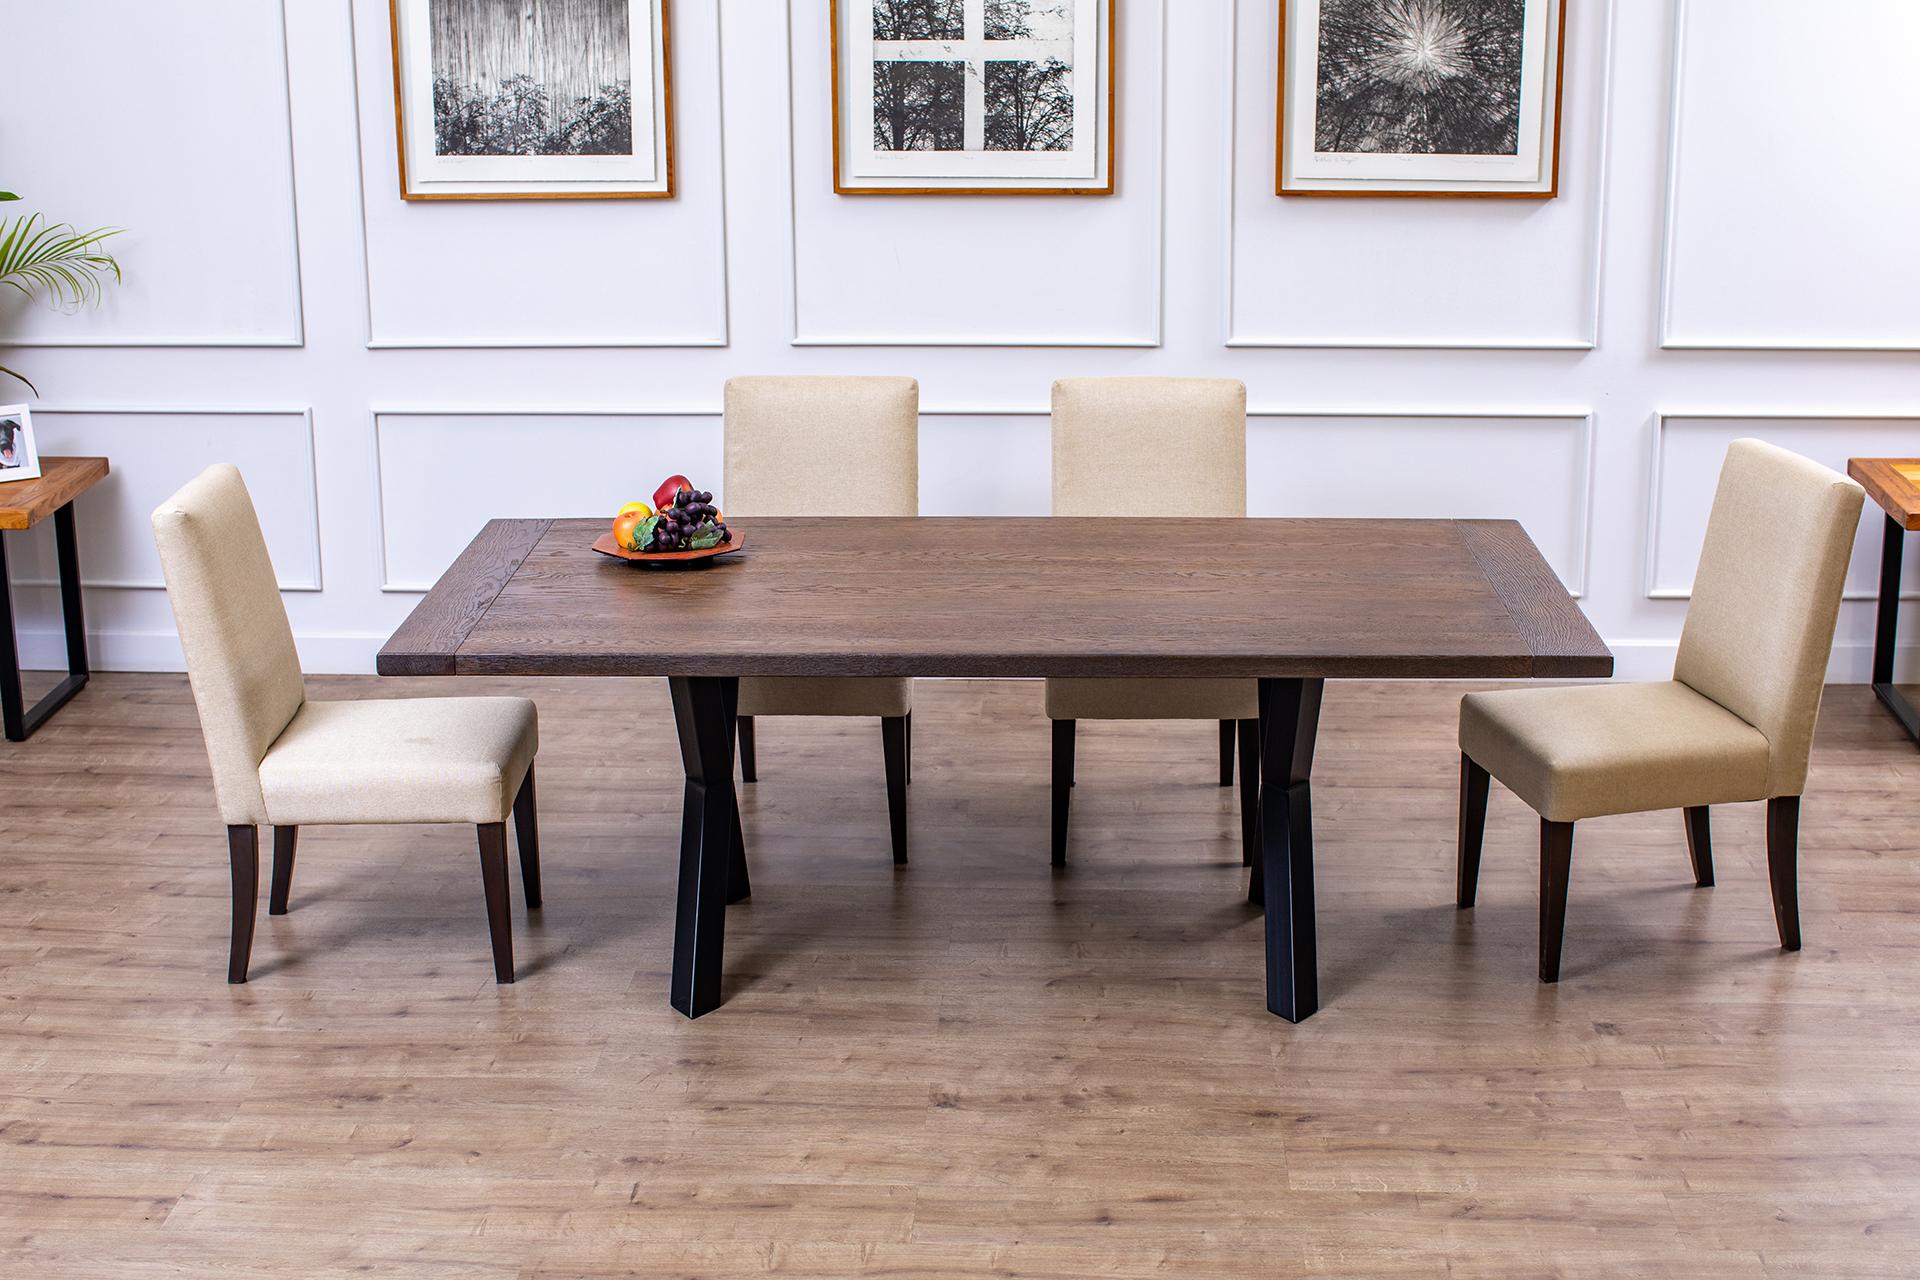 This handcrafted solid teak dining table is a masterpiece of timeless beauty and exceptional craftsmanship. Made from solid Burmese Golden Teak, this dining table showcases the natural elegance and durability of this exquisite hardwood.

Each table